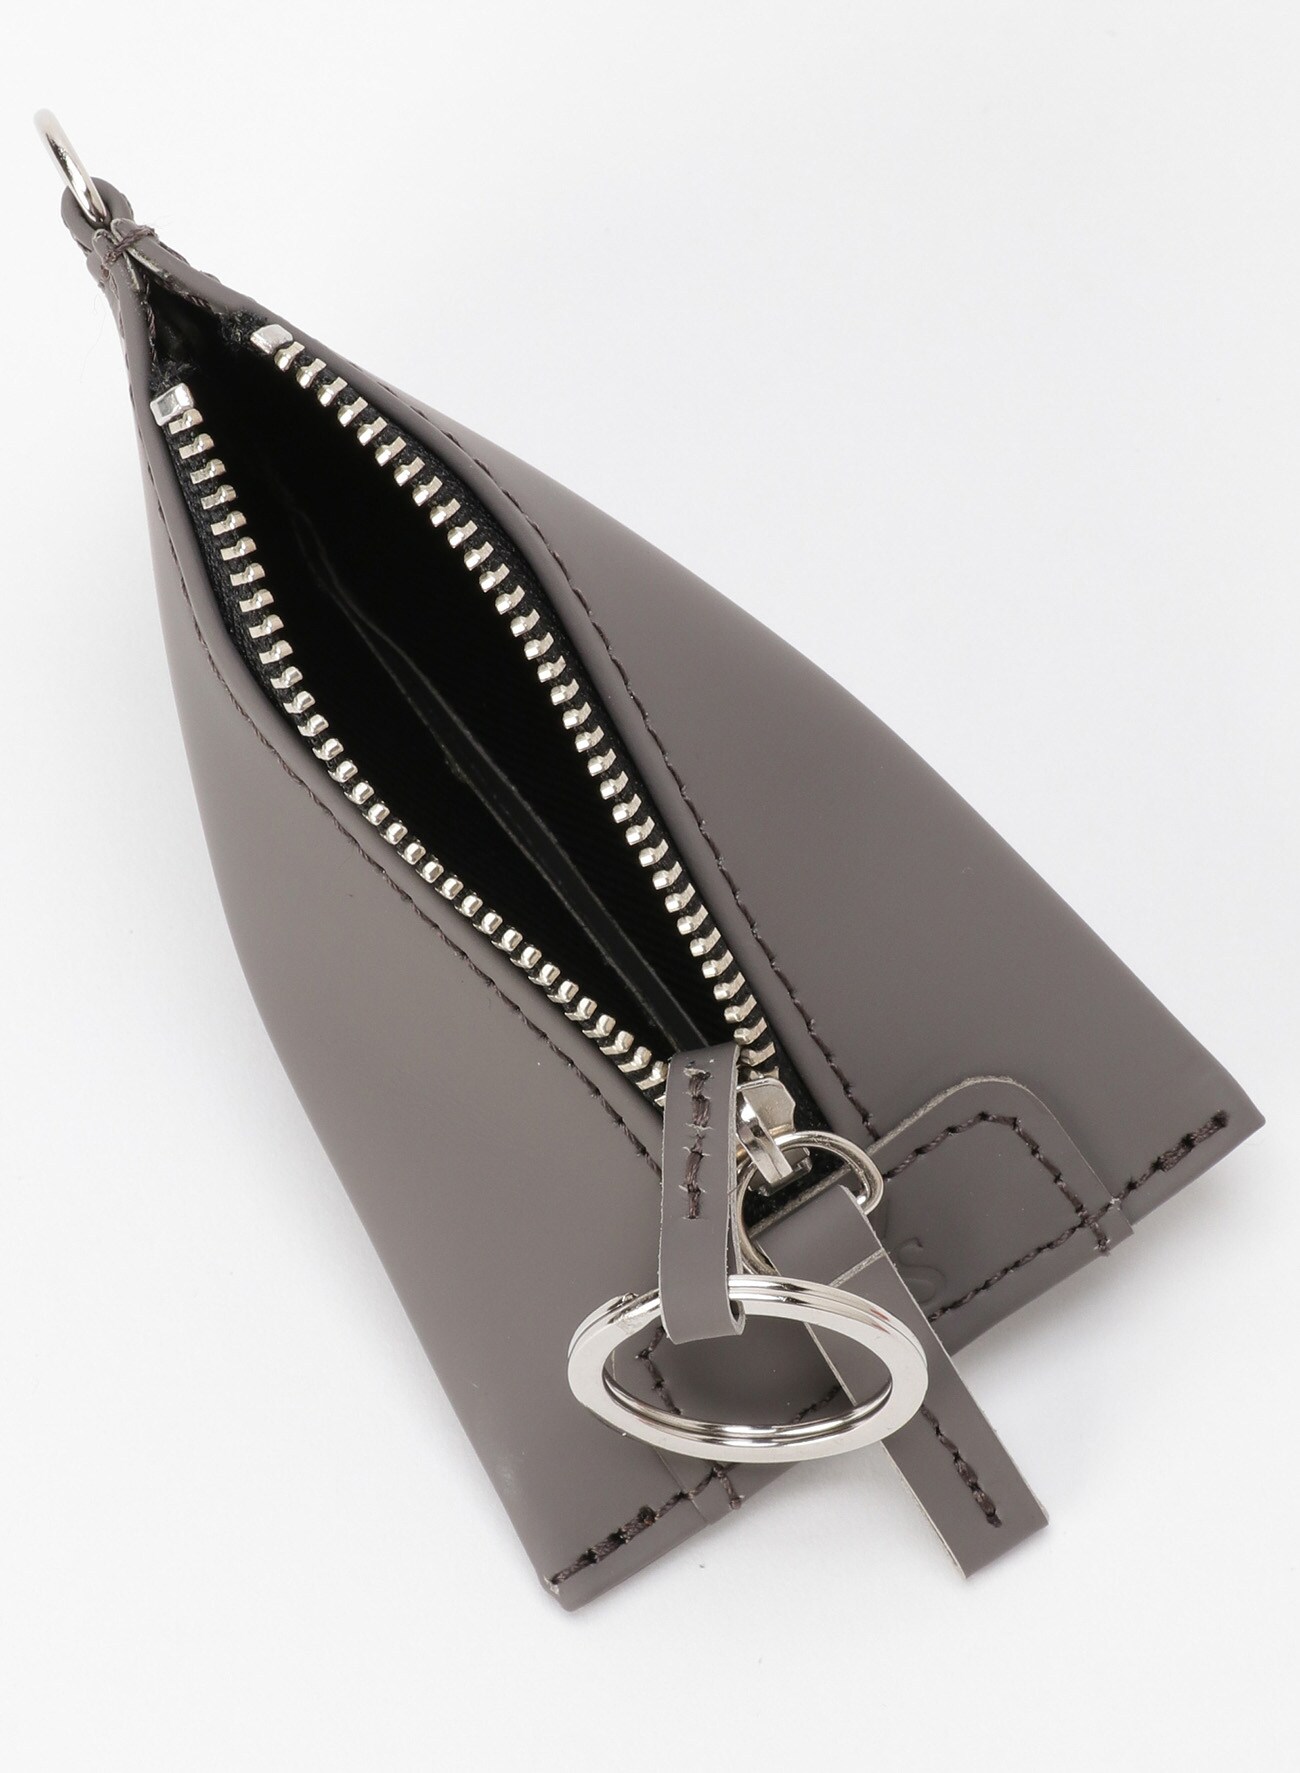 RUBBER LEATHER TRIPLED POUCH